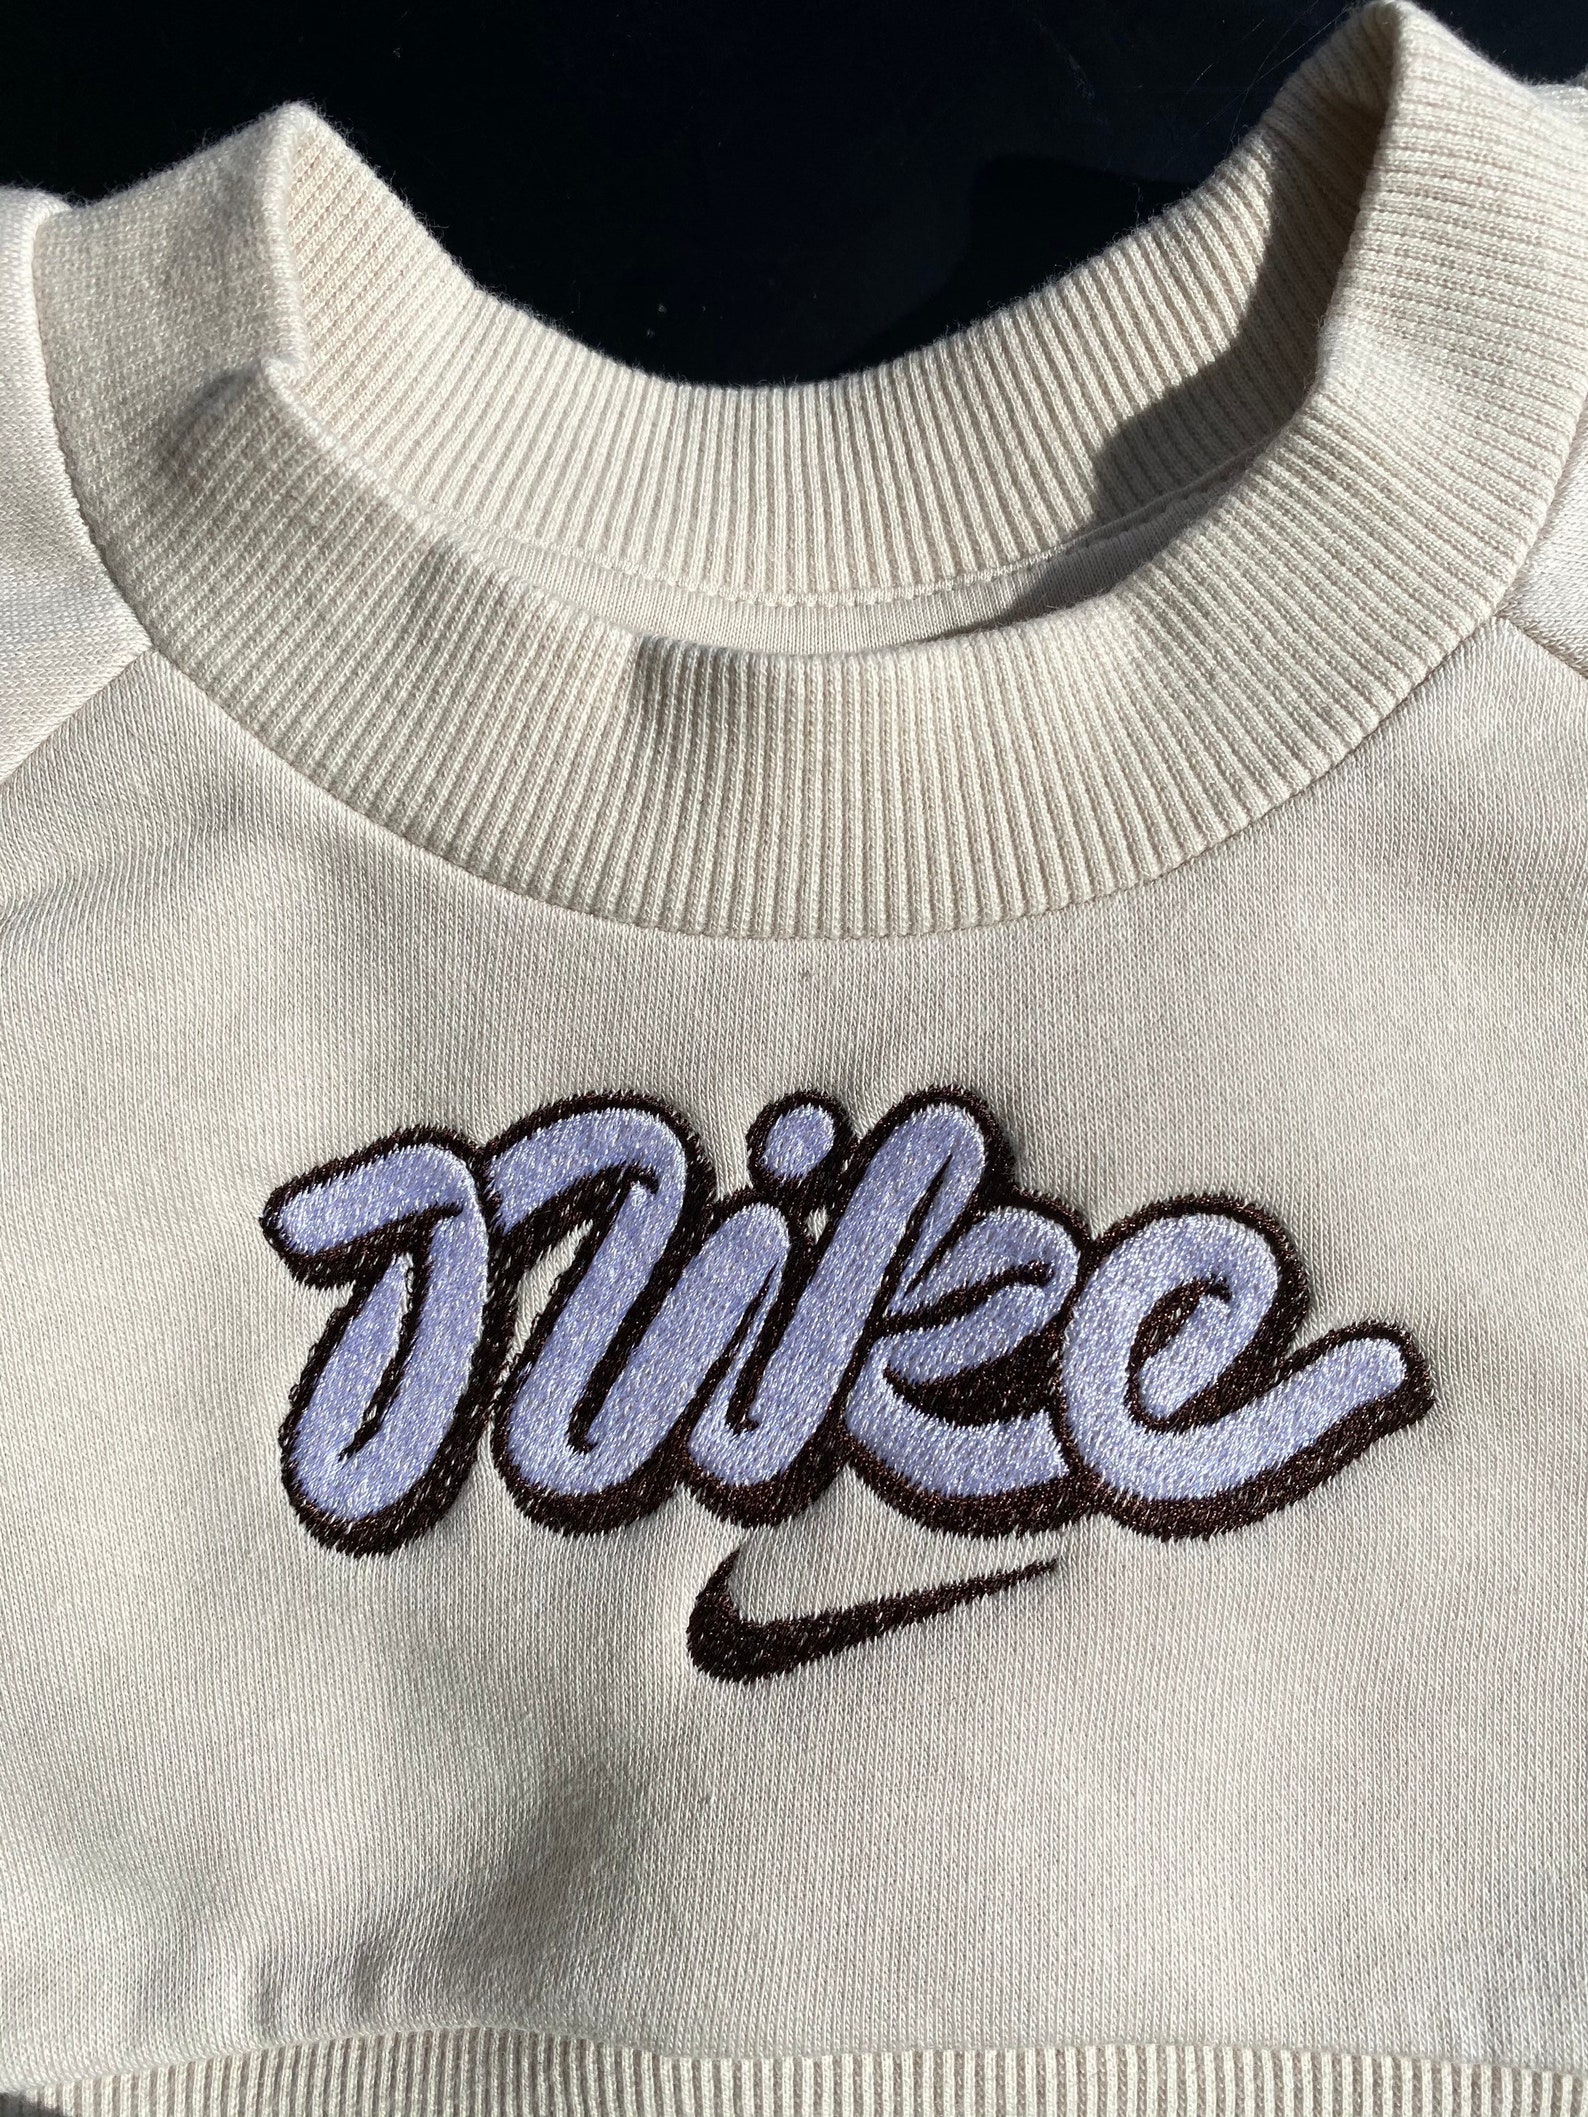 Nike cursive embroidery crop Top | Etsy